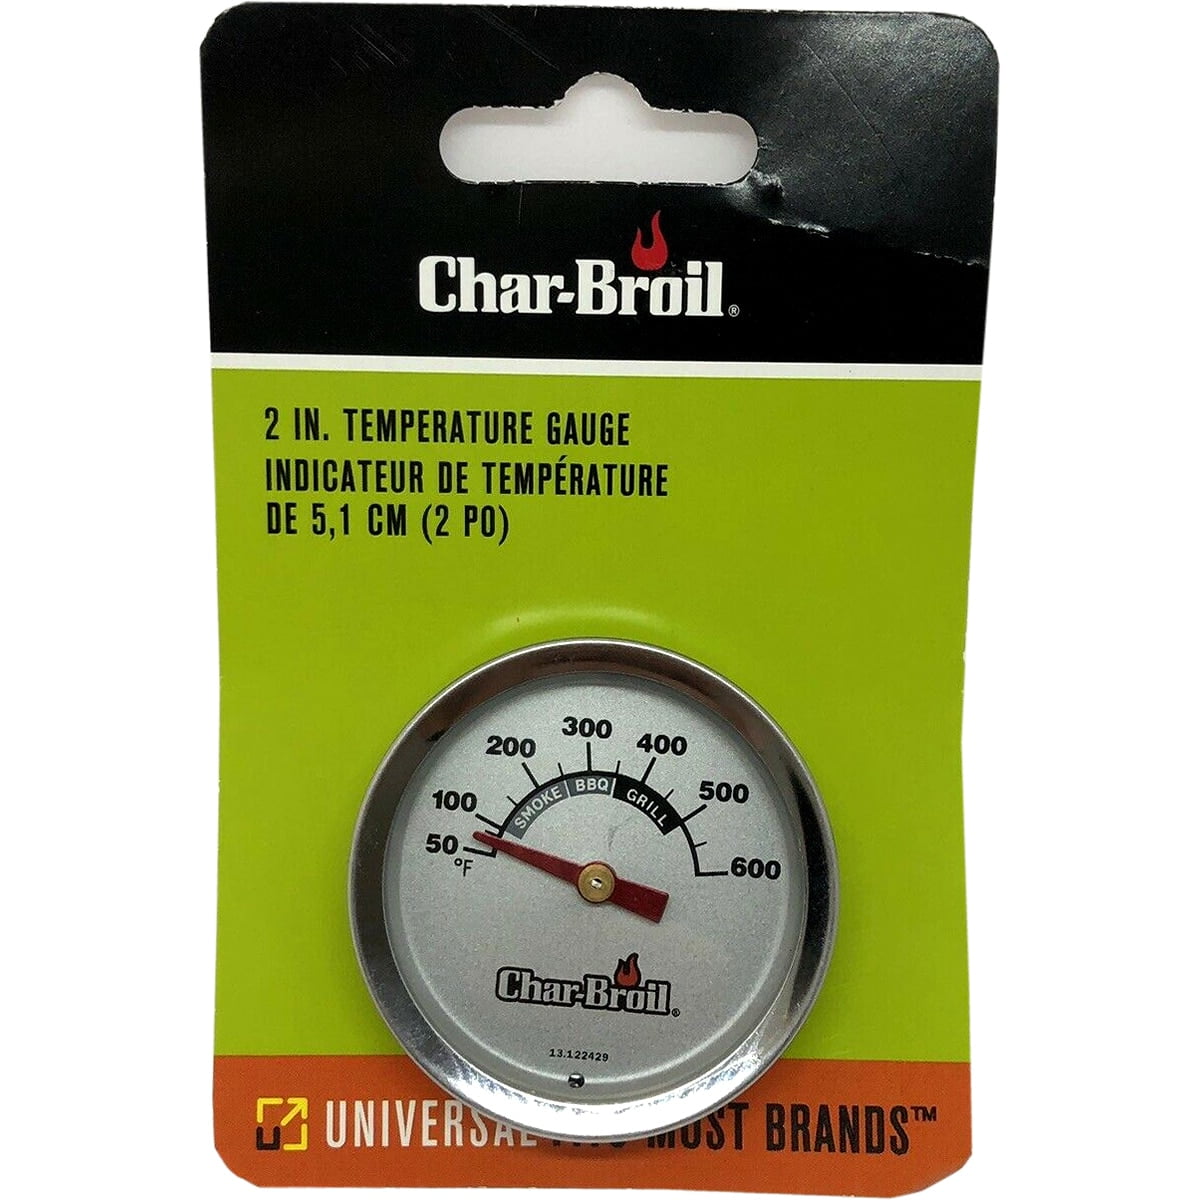 Hongso 2.375 inch Grill Thermometer Heat Indicator Replacement for Charbroil 4 